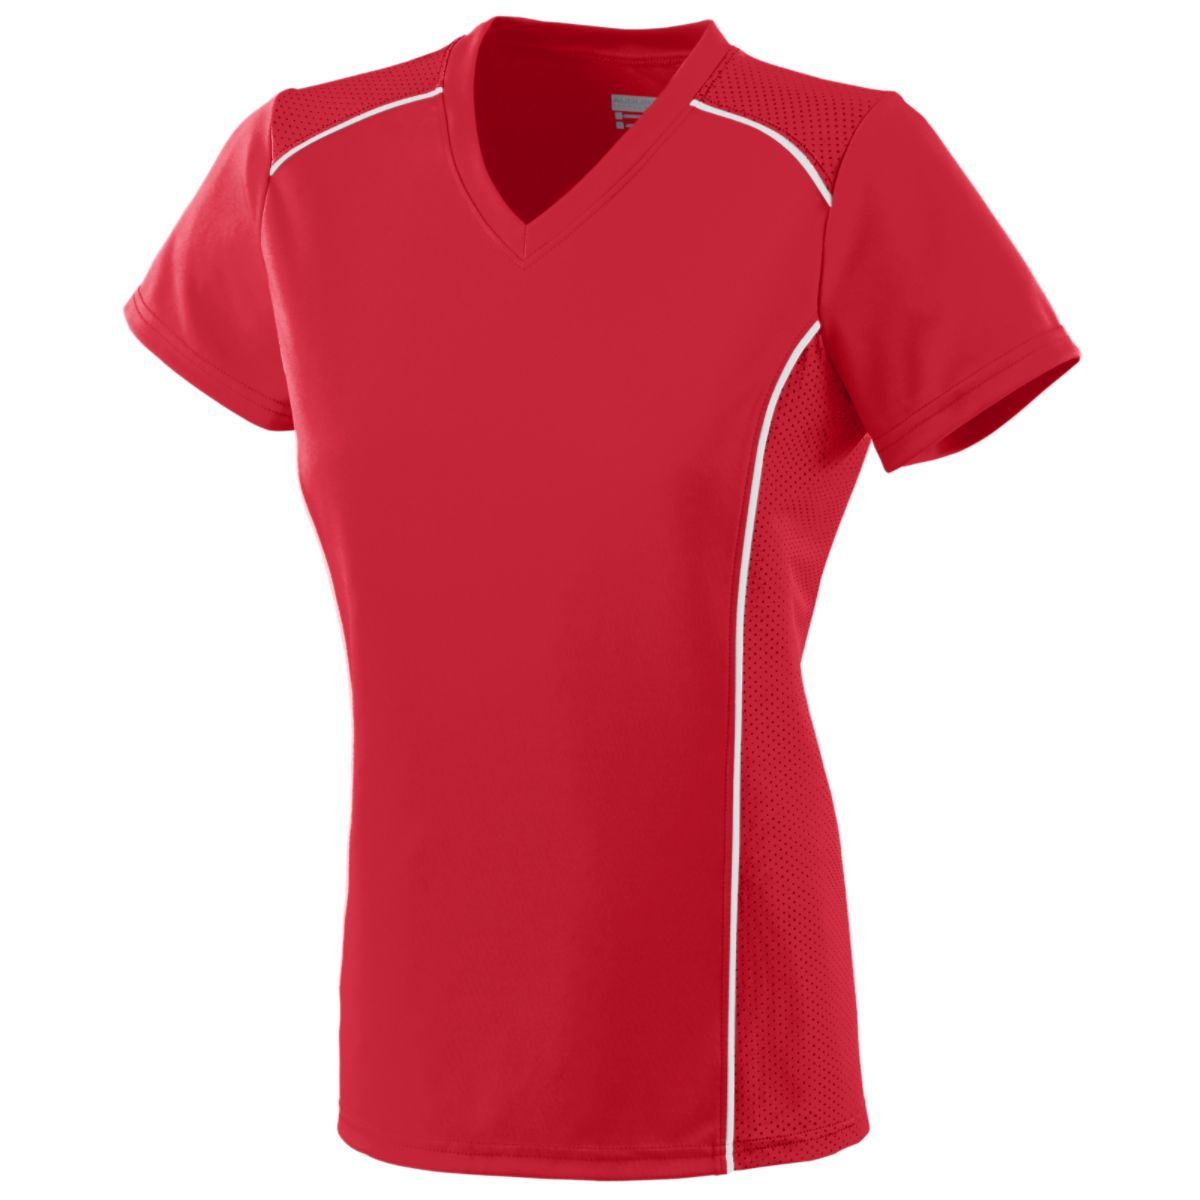 Augusta Sportswear Girls Winning Streak Jersey in Red/White  -Part of the Girls, Augusta-Products, Soccer, Girls-Jersey, Shirts, All-Sports-1 product lines at KanaleyCreations.com